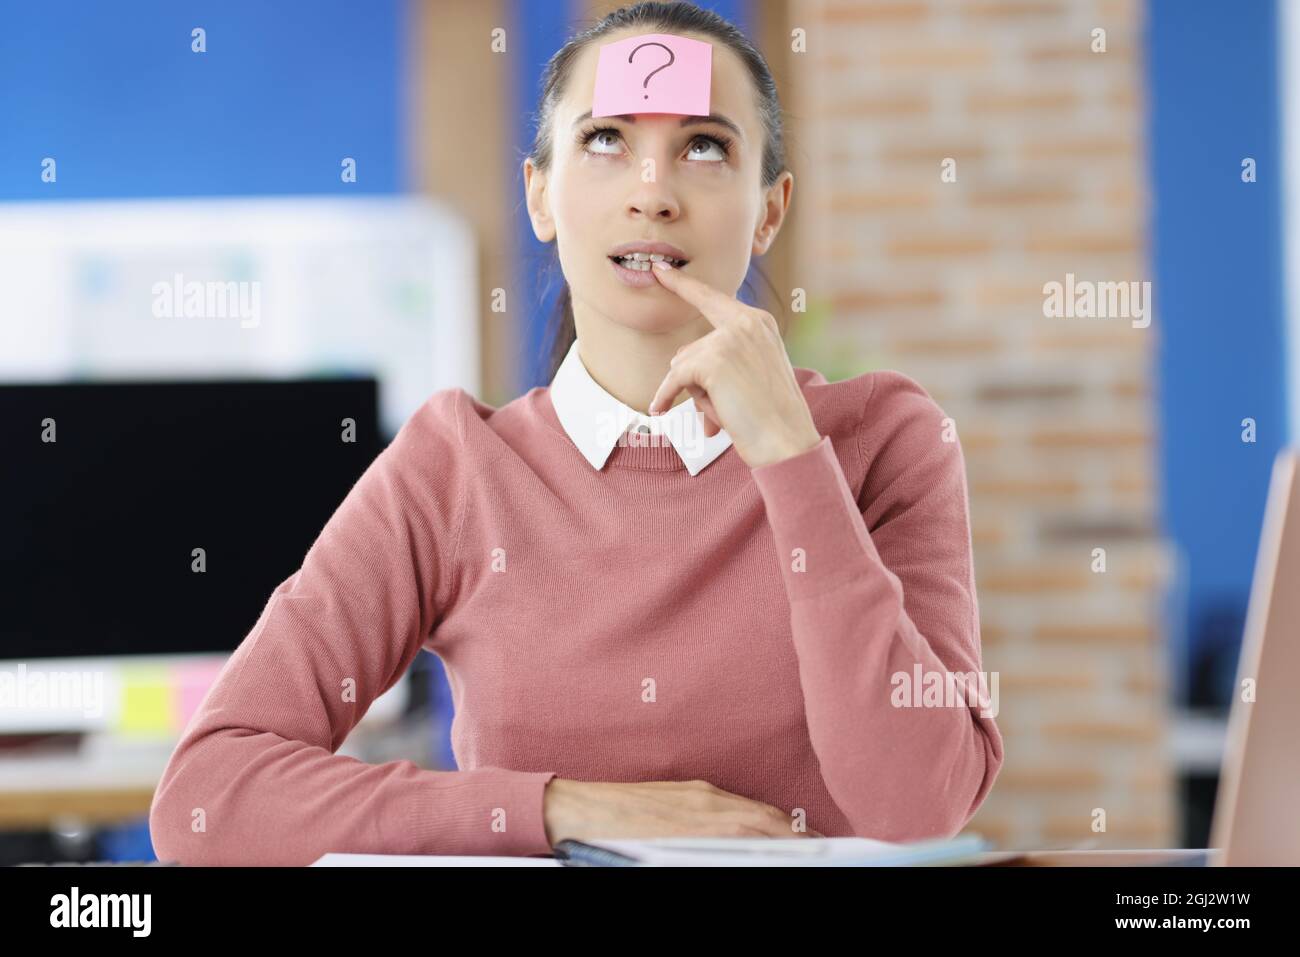 Pensive woman on head with sticker with question mark Stock Photo